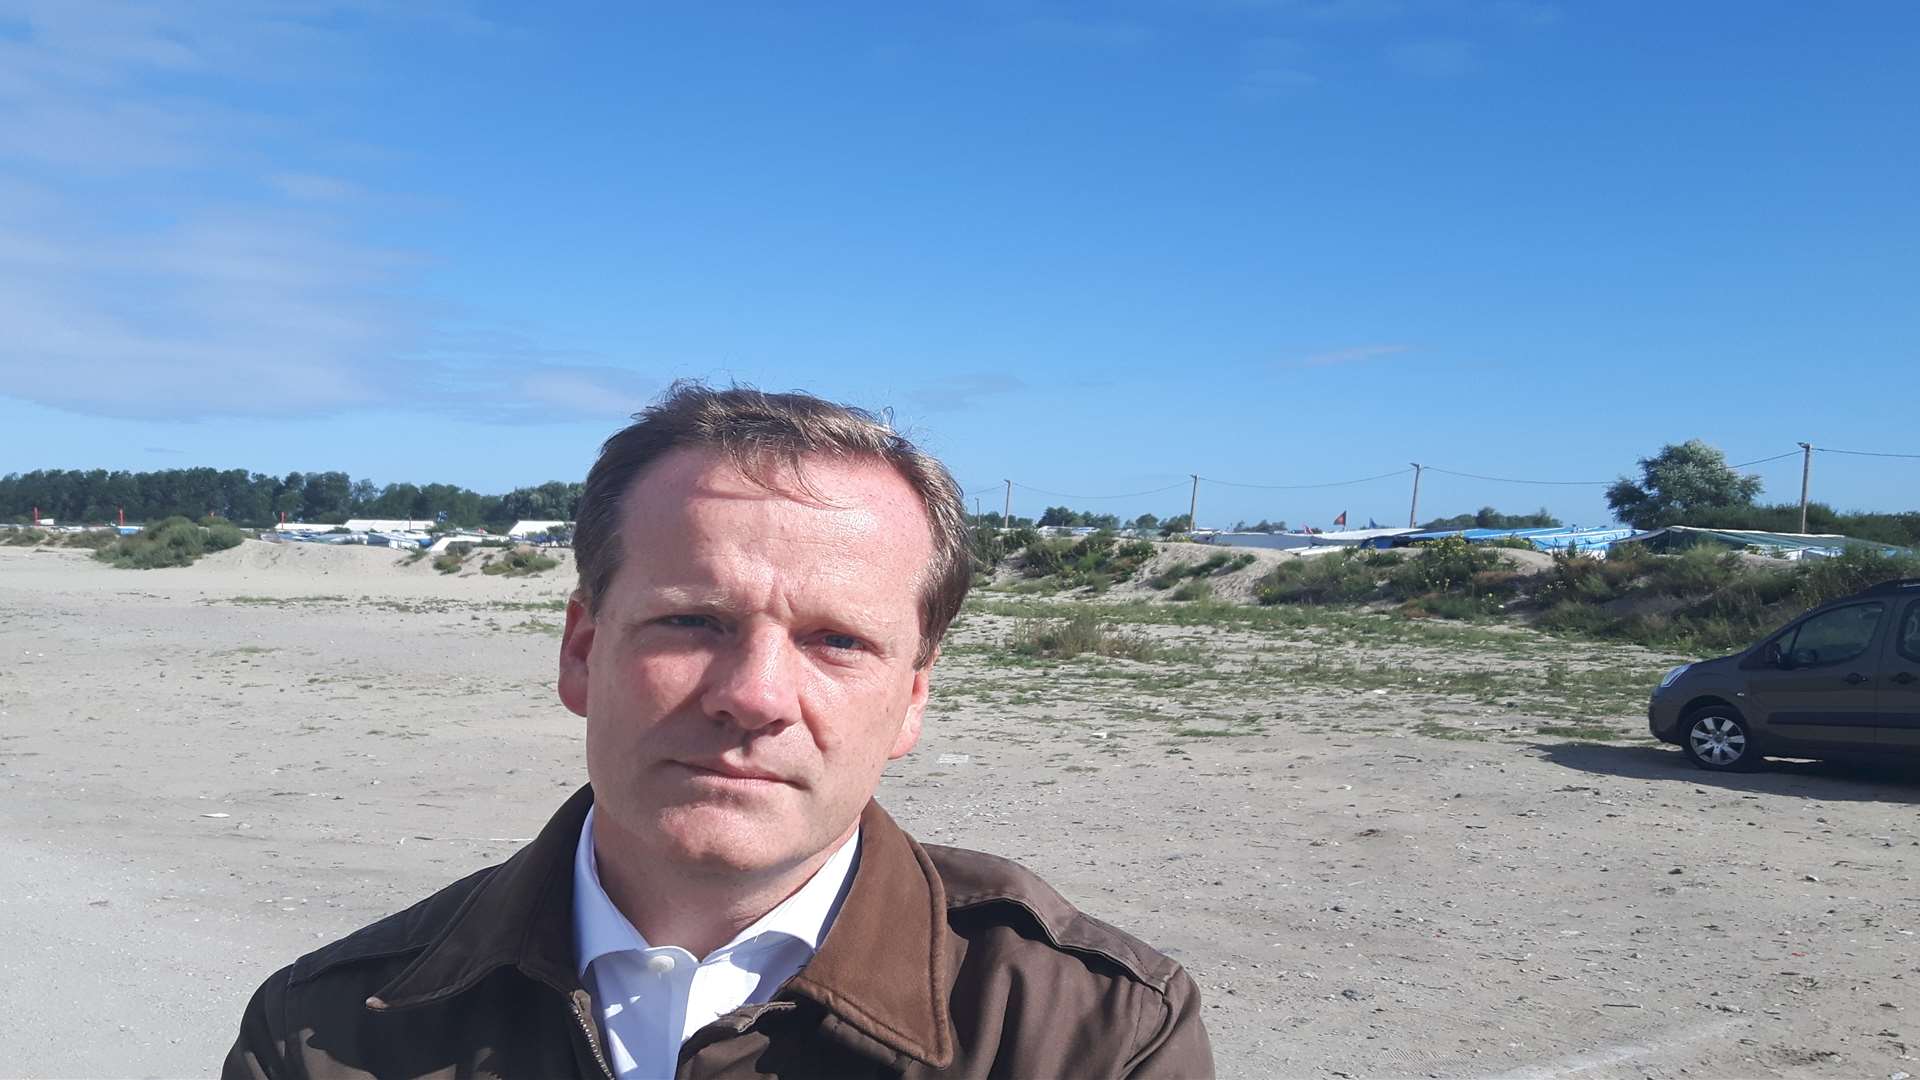 MP Charlie Elphicke outside the Jungle migrant camp last year